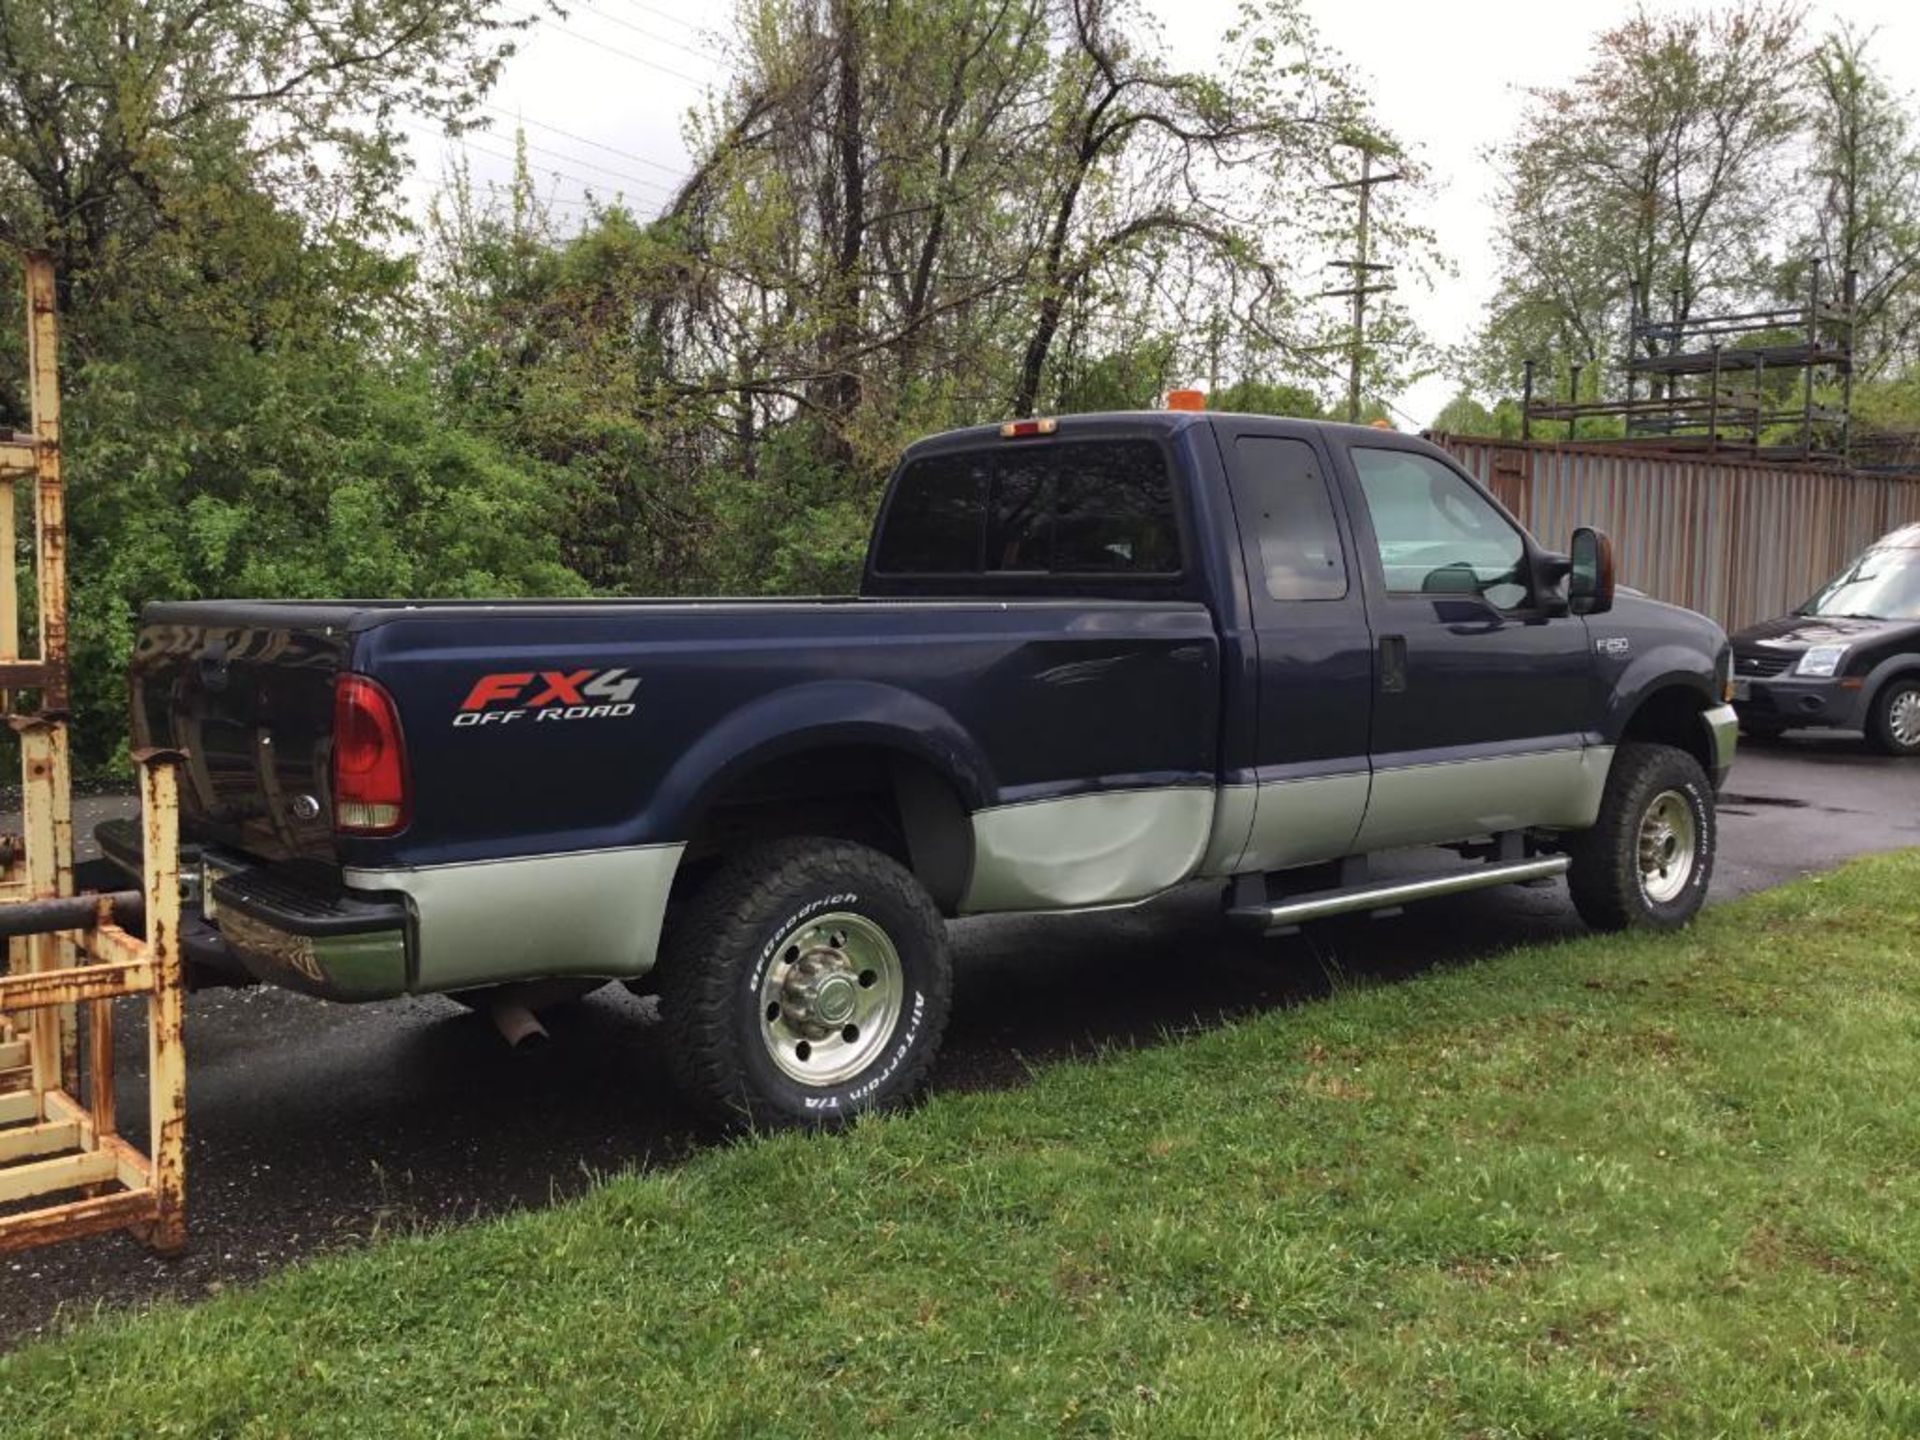 2004 Ford F-250 4x4 Pick Up Truck with Extended Cab, 8 ft. Bed, VIN: 1FTNX21LX4ELC54300, S.4 V8 Engi - Image 3 of 6